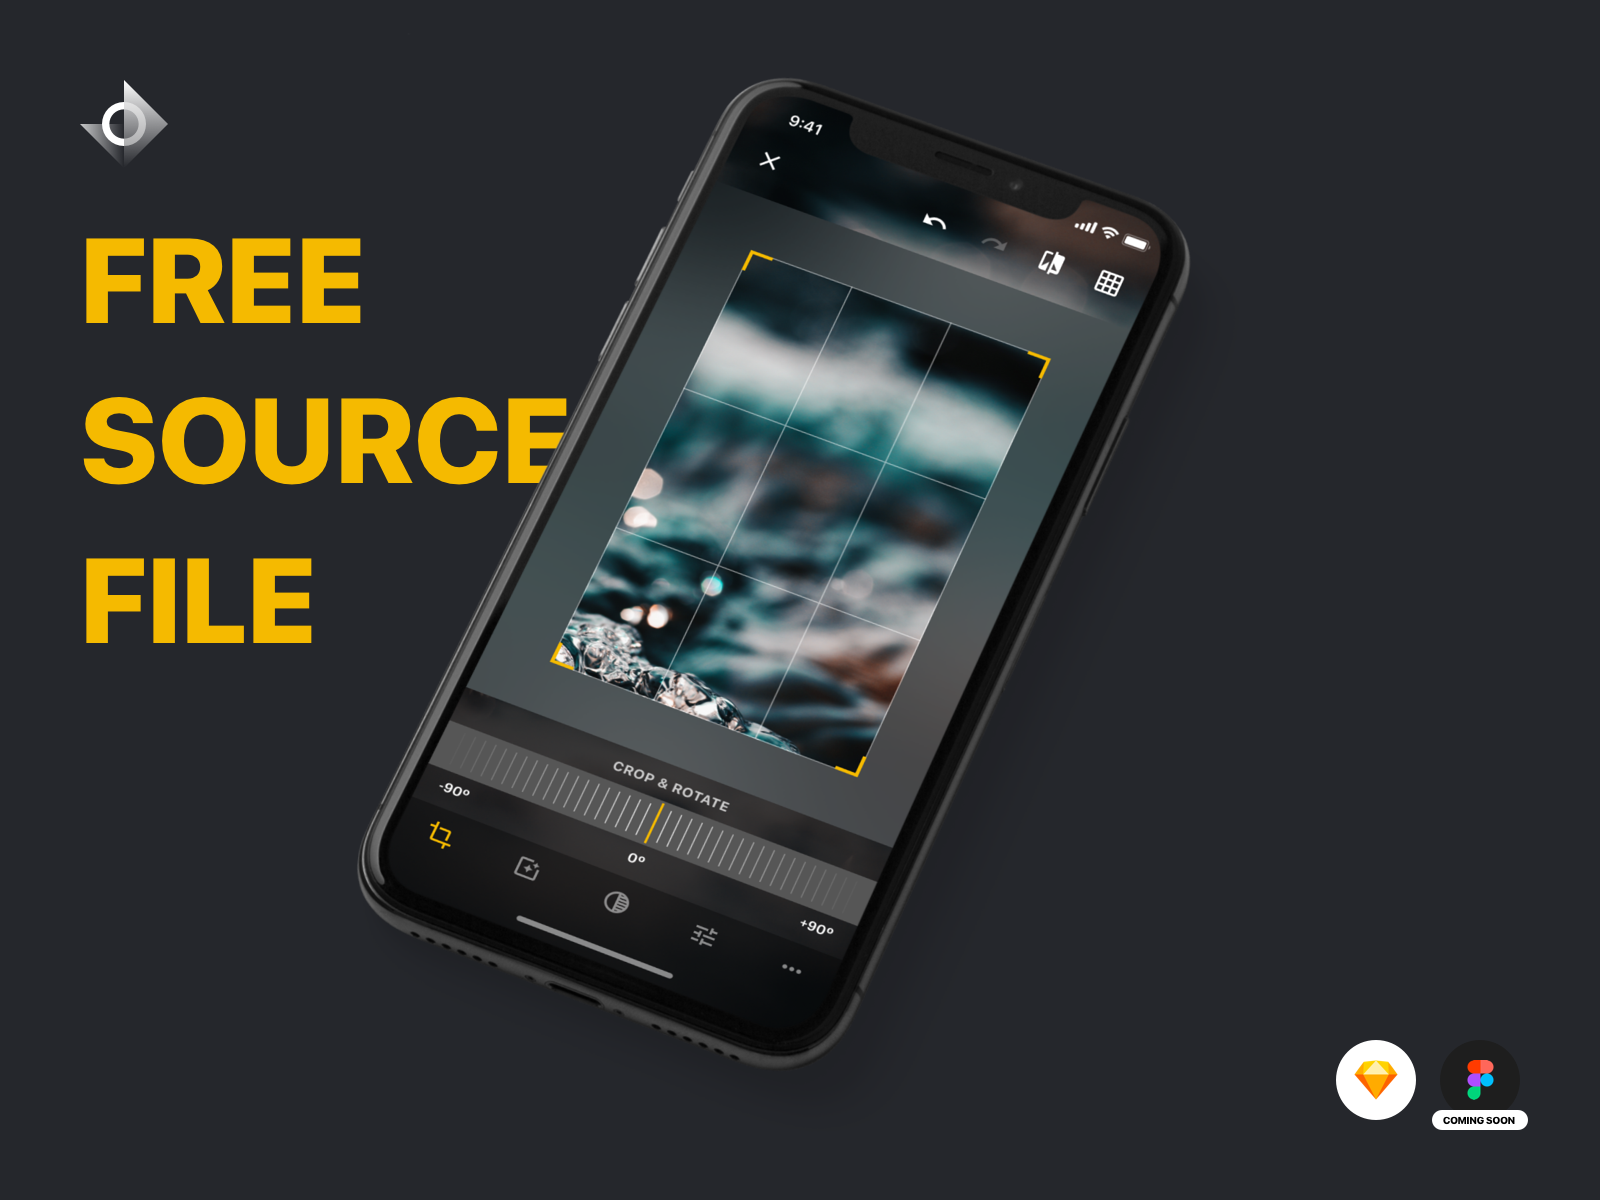 A mockup of a iPhone X photo editing app on the crop and rotate screen with the text "Free Source File!"